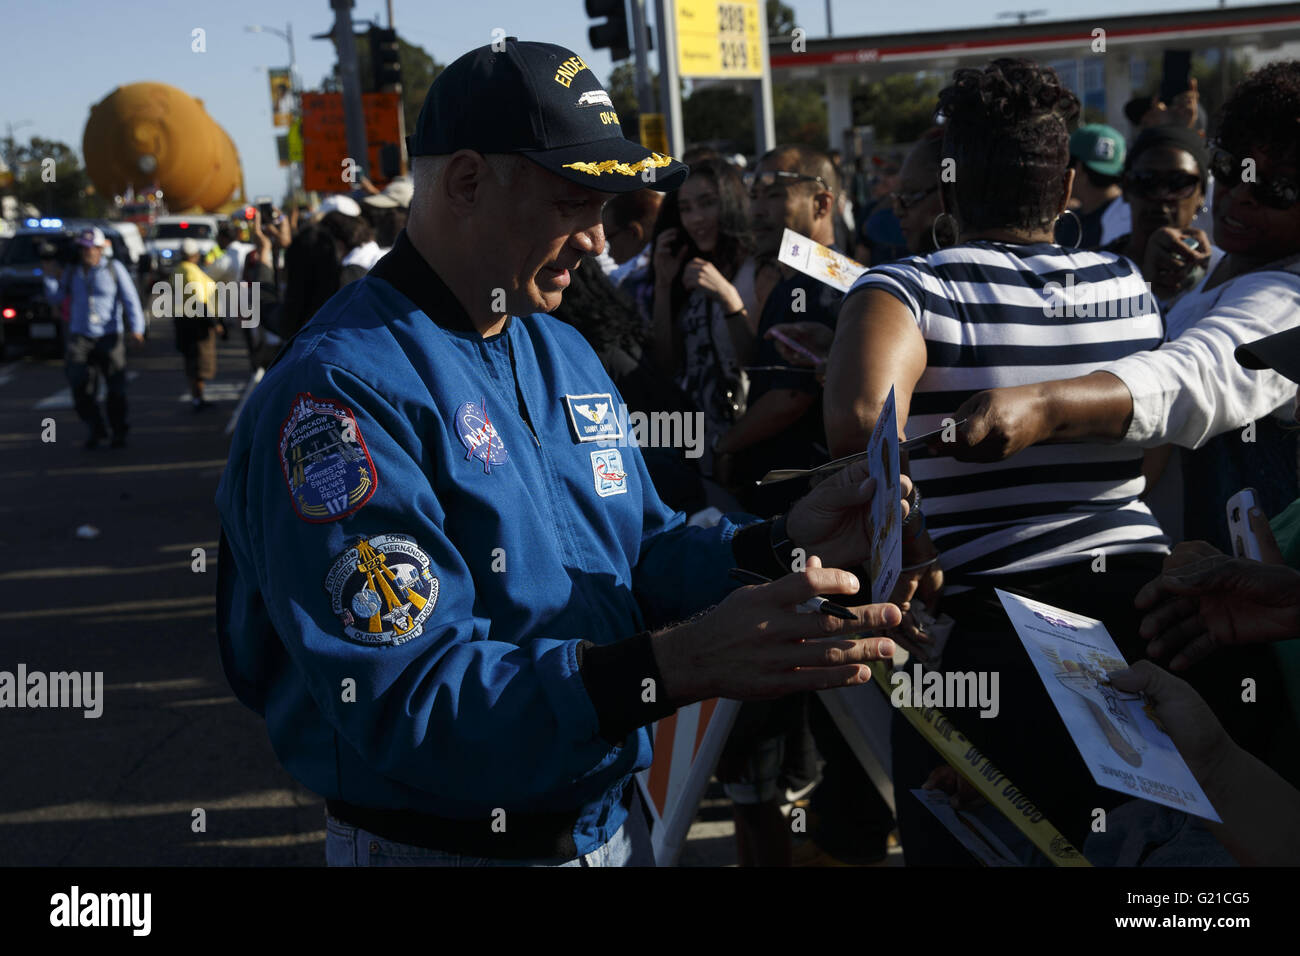 Los Angeles, California, USA. 21st May, 2016. Astronaut John ''Danny'' Olivas signs autographs as the ET-94 fuel tank for the Space Shuttle makes its way up Vermont to the California Science Center on Saturday, May 21, 2016 in Los Angeles, Calif. NASA's last remaining external fuel tank for the Space Shuttle, ET-94, traveled over 16 miles to be united with the Endeavor, where the 66,000 pound fuel tank will be displayed like it is ready to launch. © 2016 Patrick T. Fallon © Patrick Fallon/ZUMA Wire/Alamy Live News Stock Photo